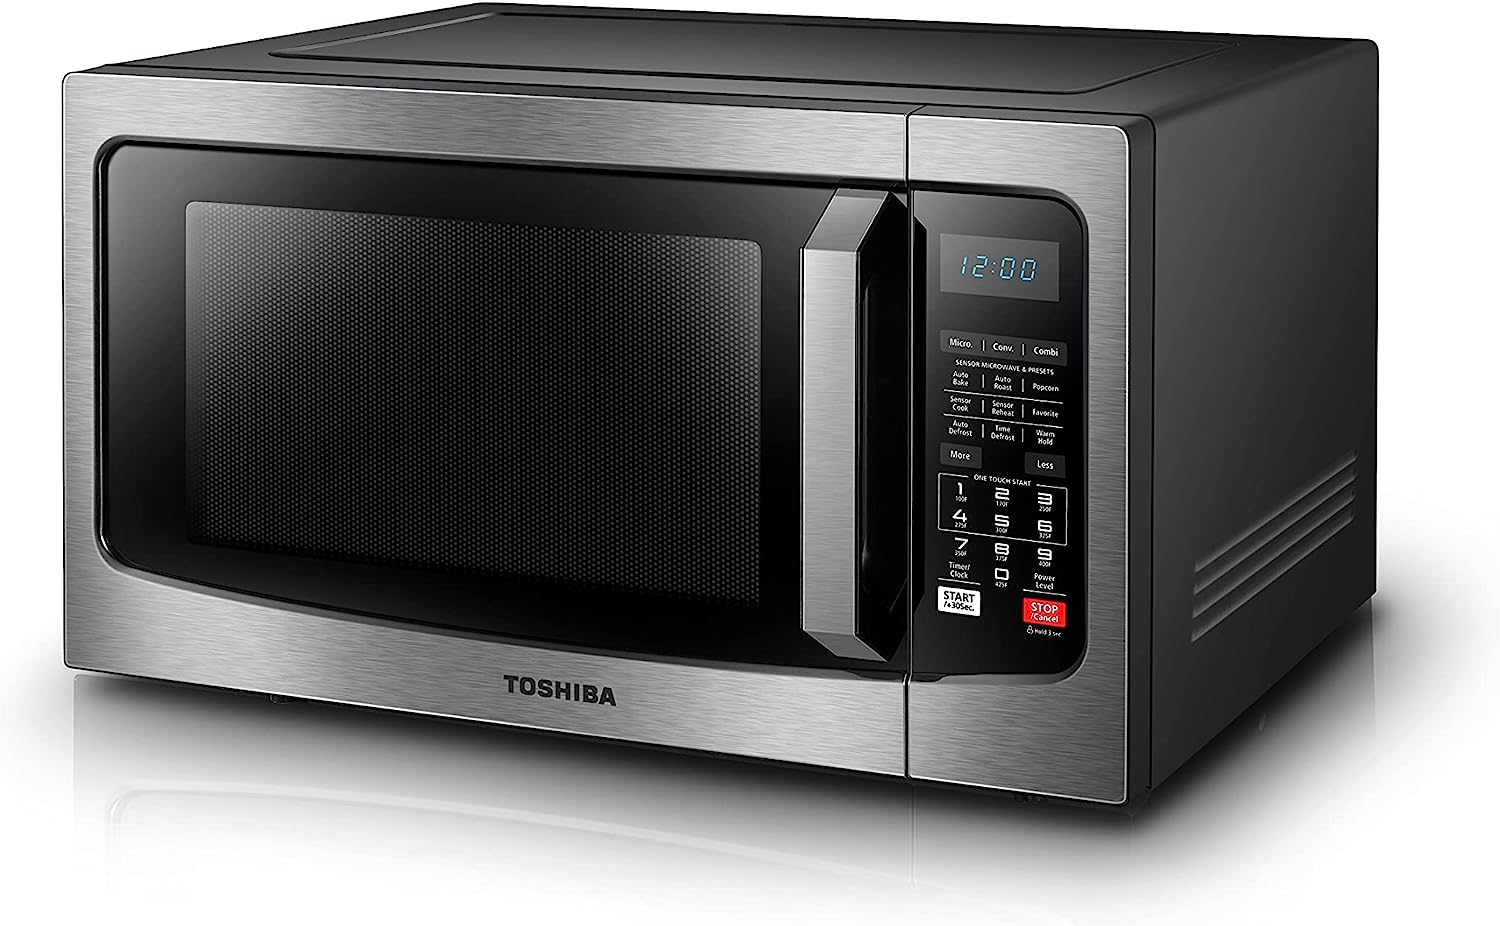 TOSHIBA 3-in-1 EC042A5C-SS Countertop Microwave Oven, [...]